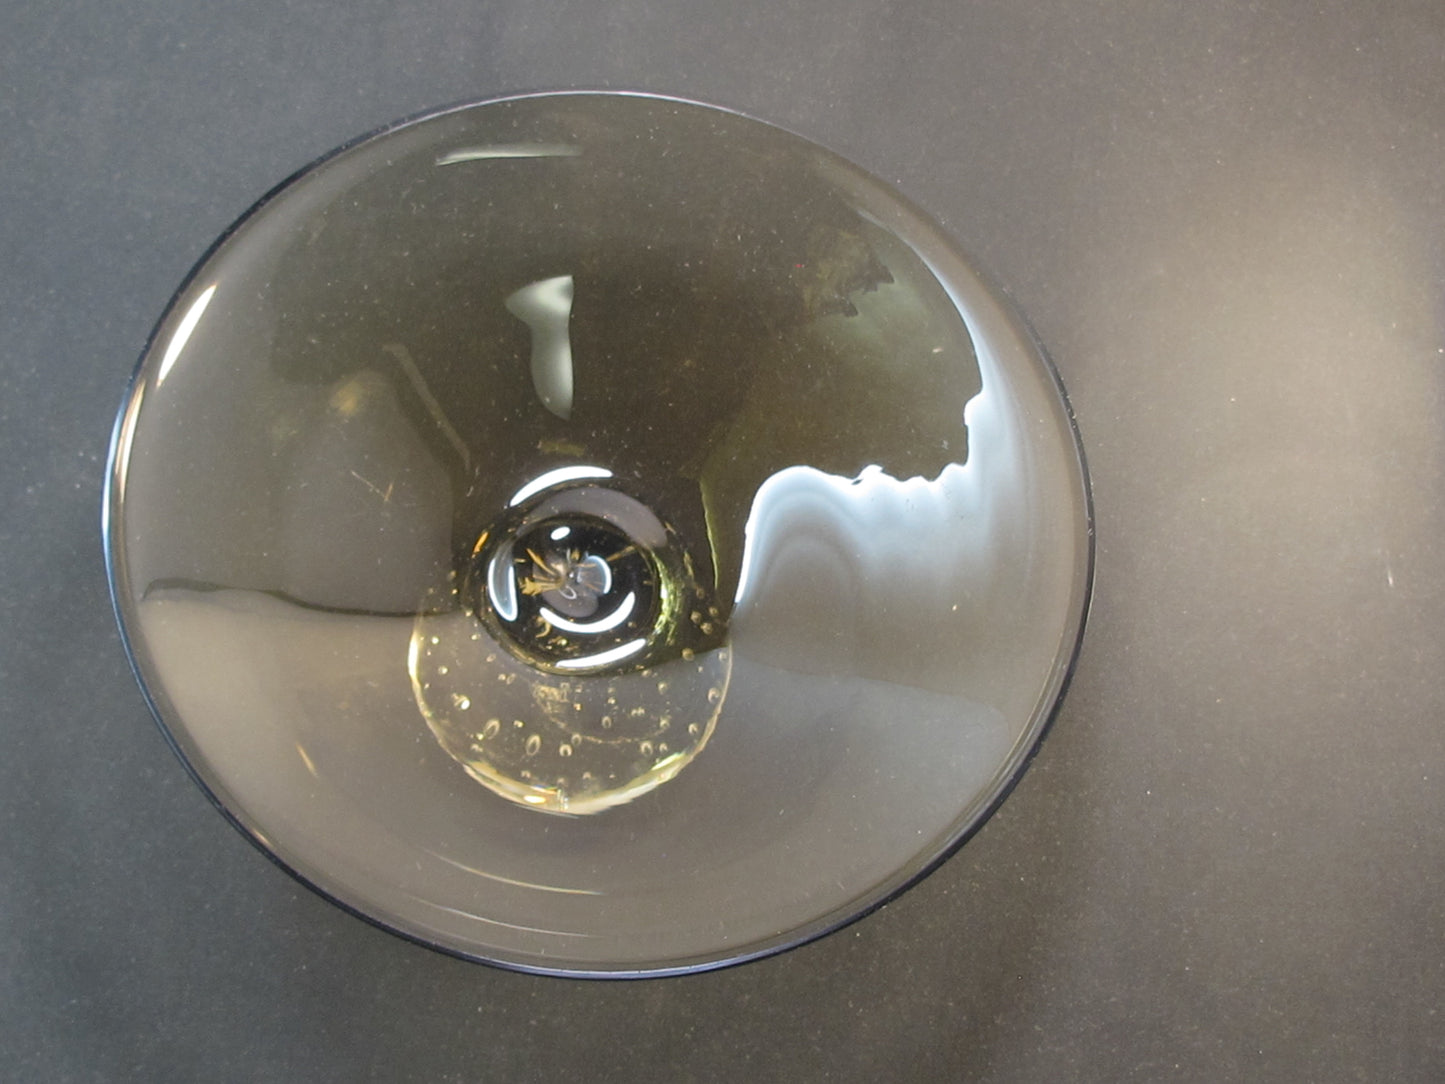 Erickson charcoal glass bowl with controlled bubbles